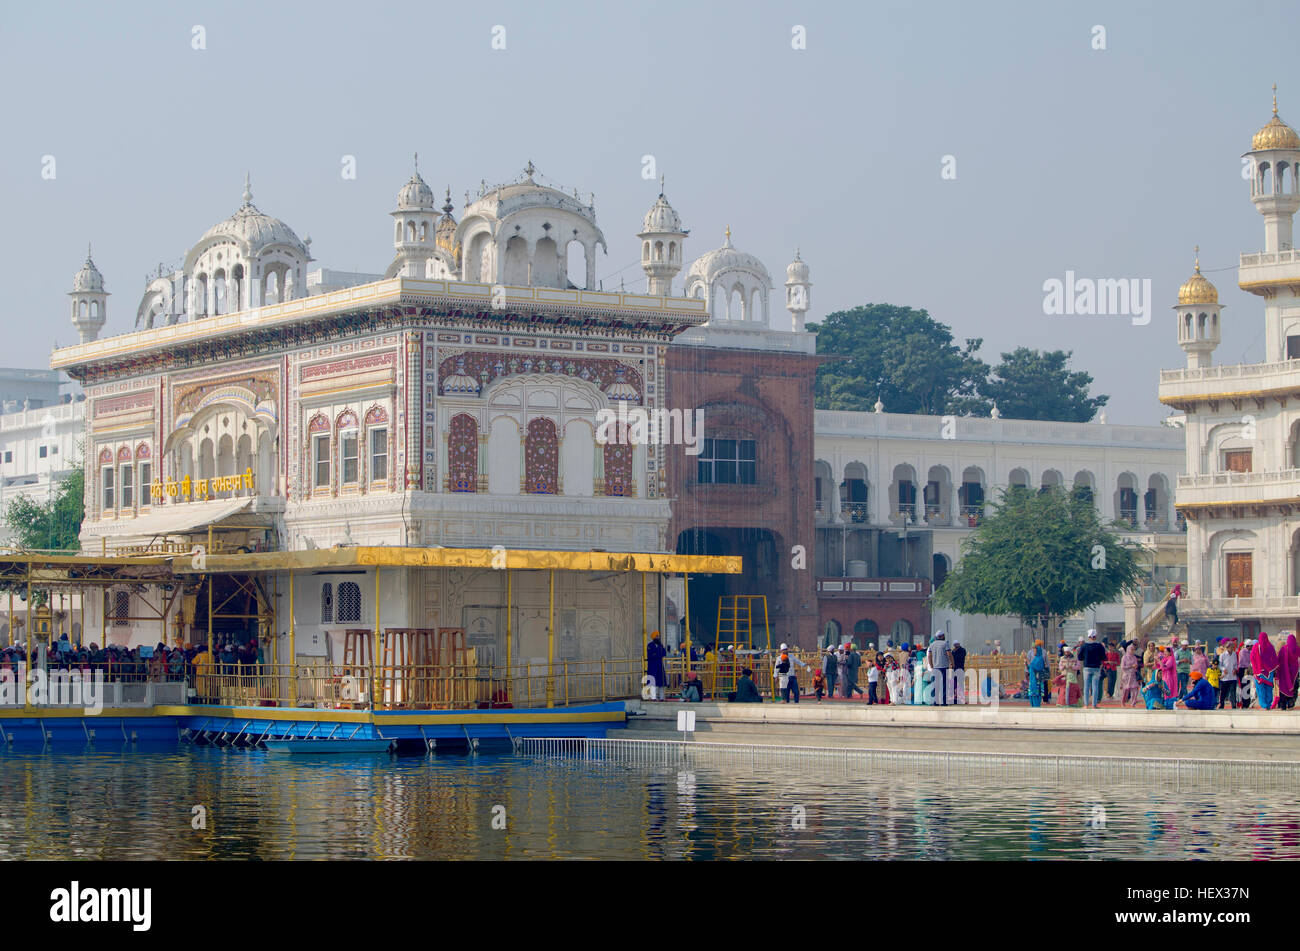 Architecture and place of interest of the city of Amritsar in India,a construction, amritsar, architecture, art, india, religion Stock Photo